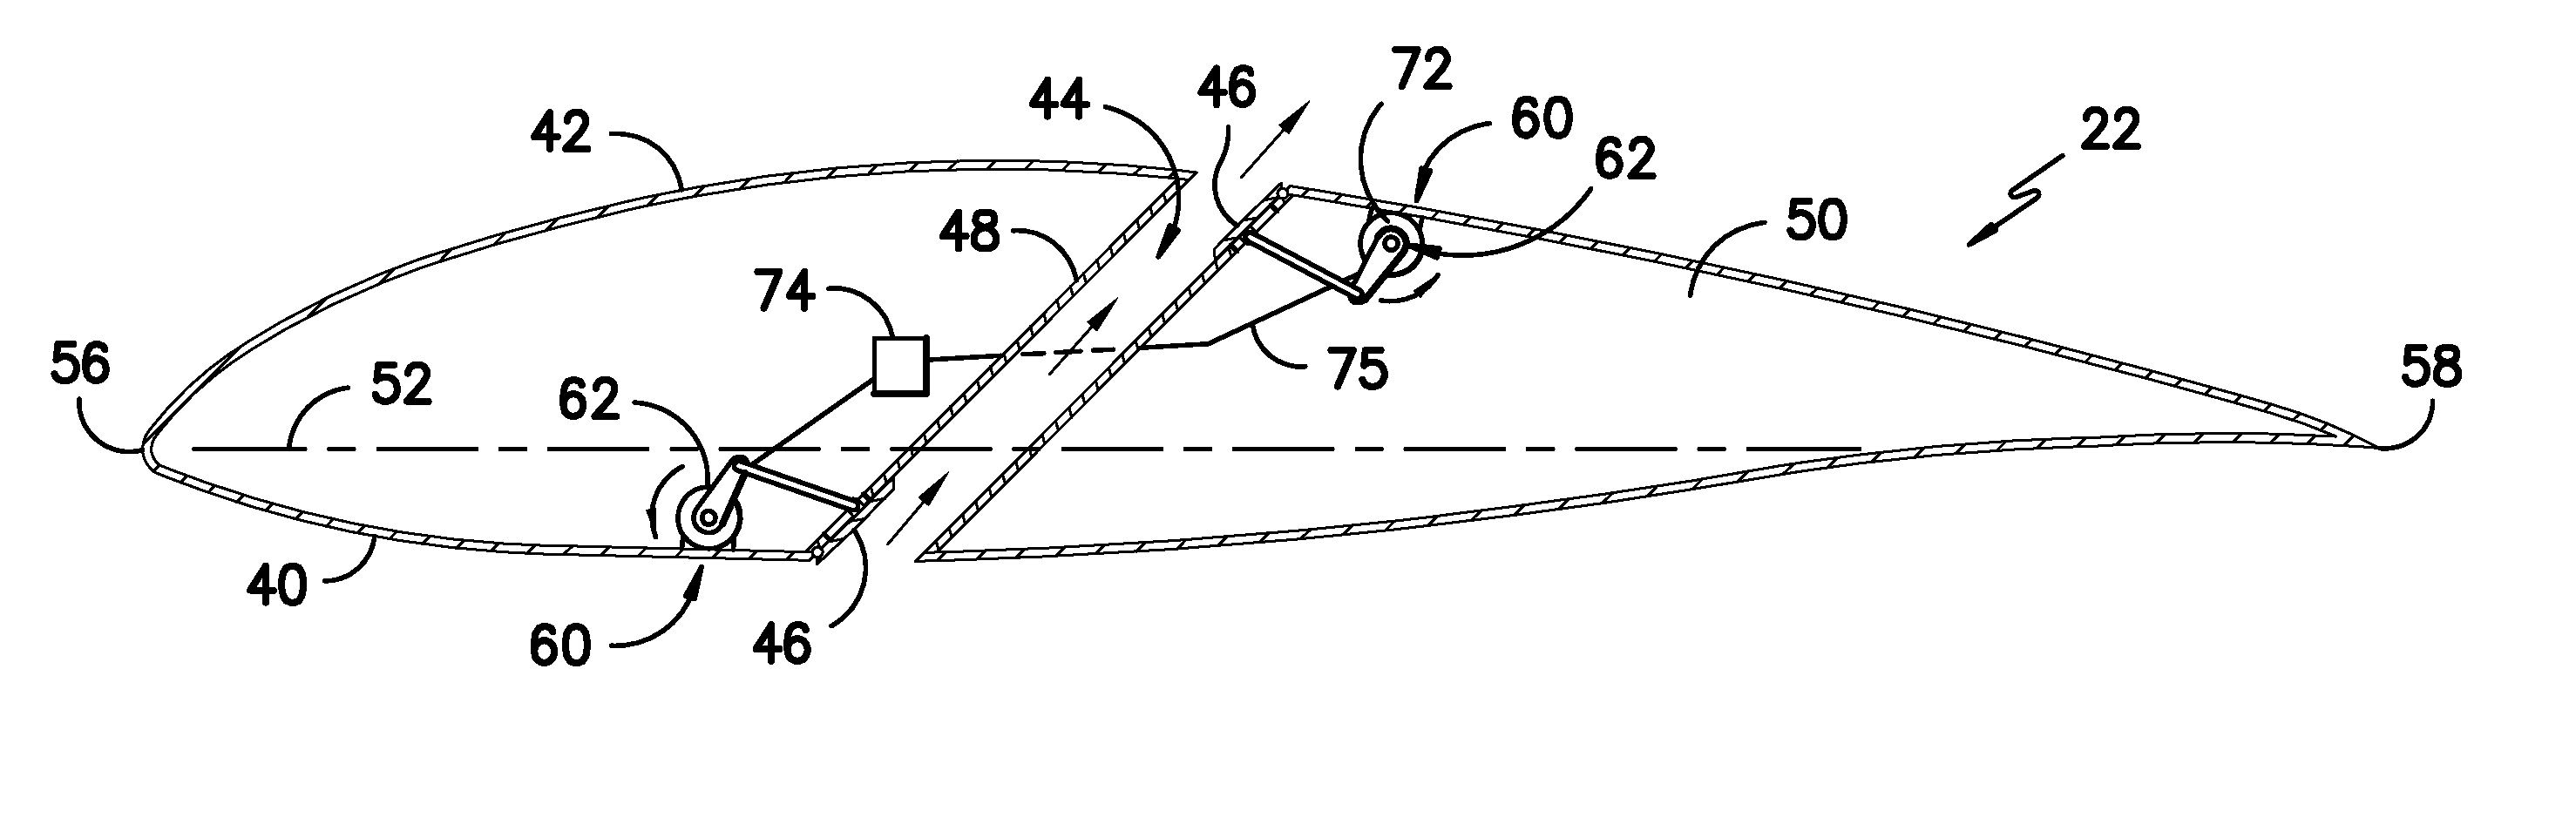 Wind turbine rotor blade with actuatable airfoil passages